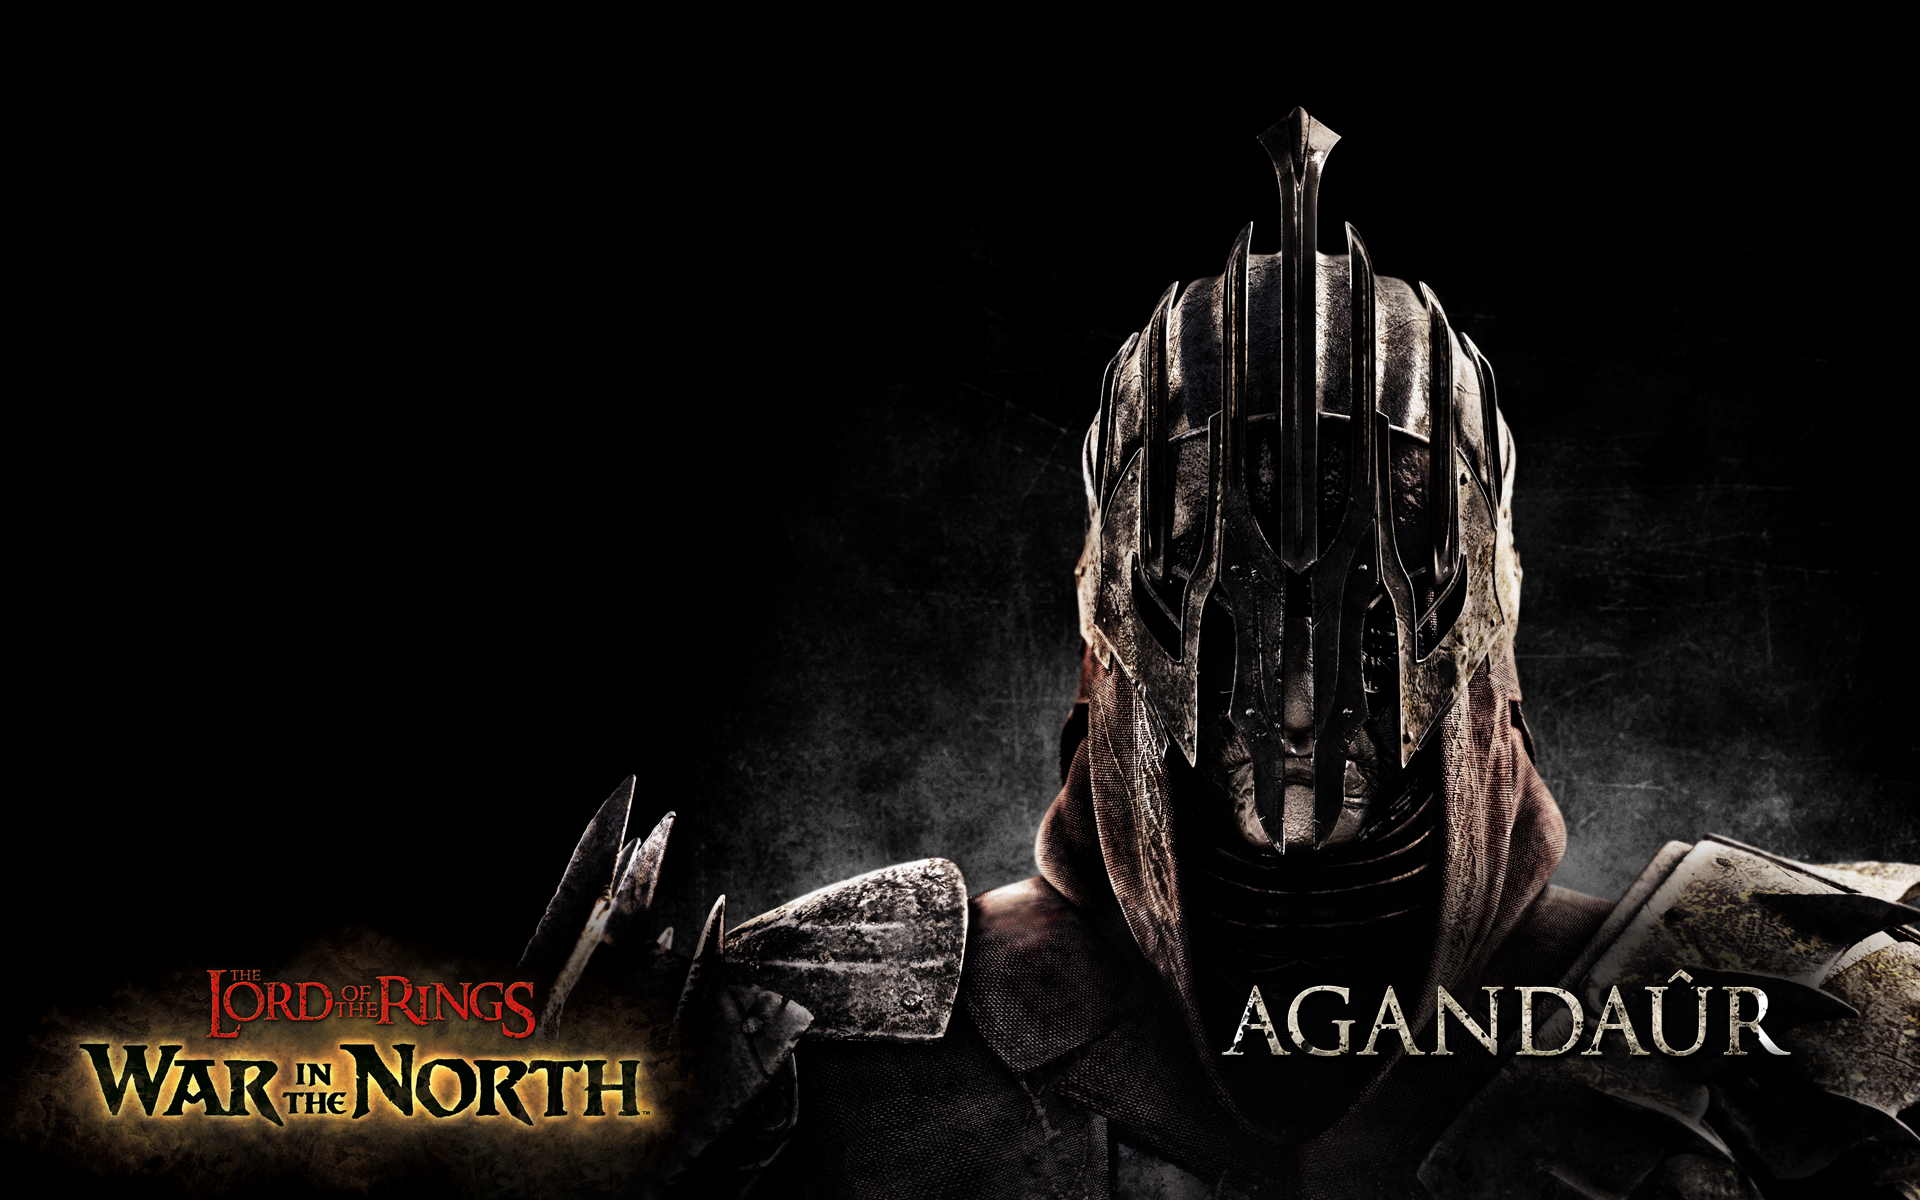 Lord of the rings war in the north no steam фото 70